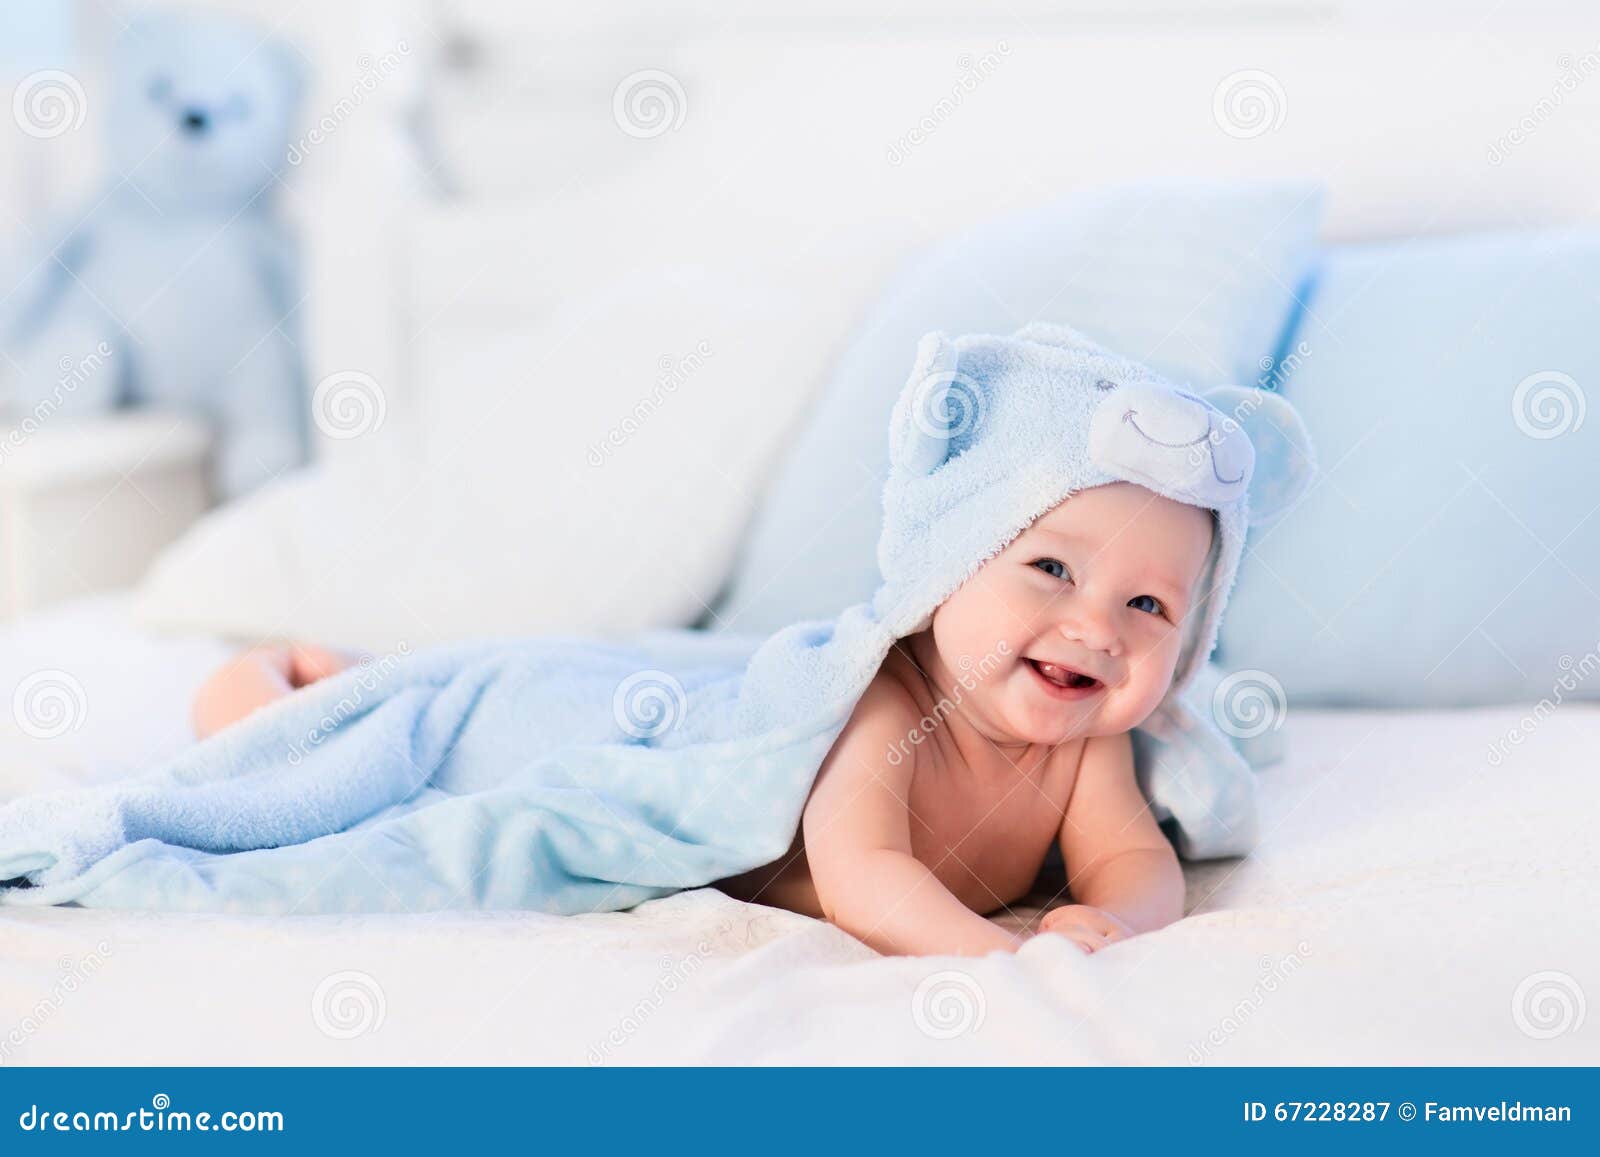 baby boy in blue towel on white bed